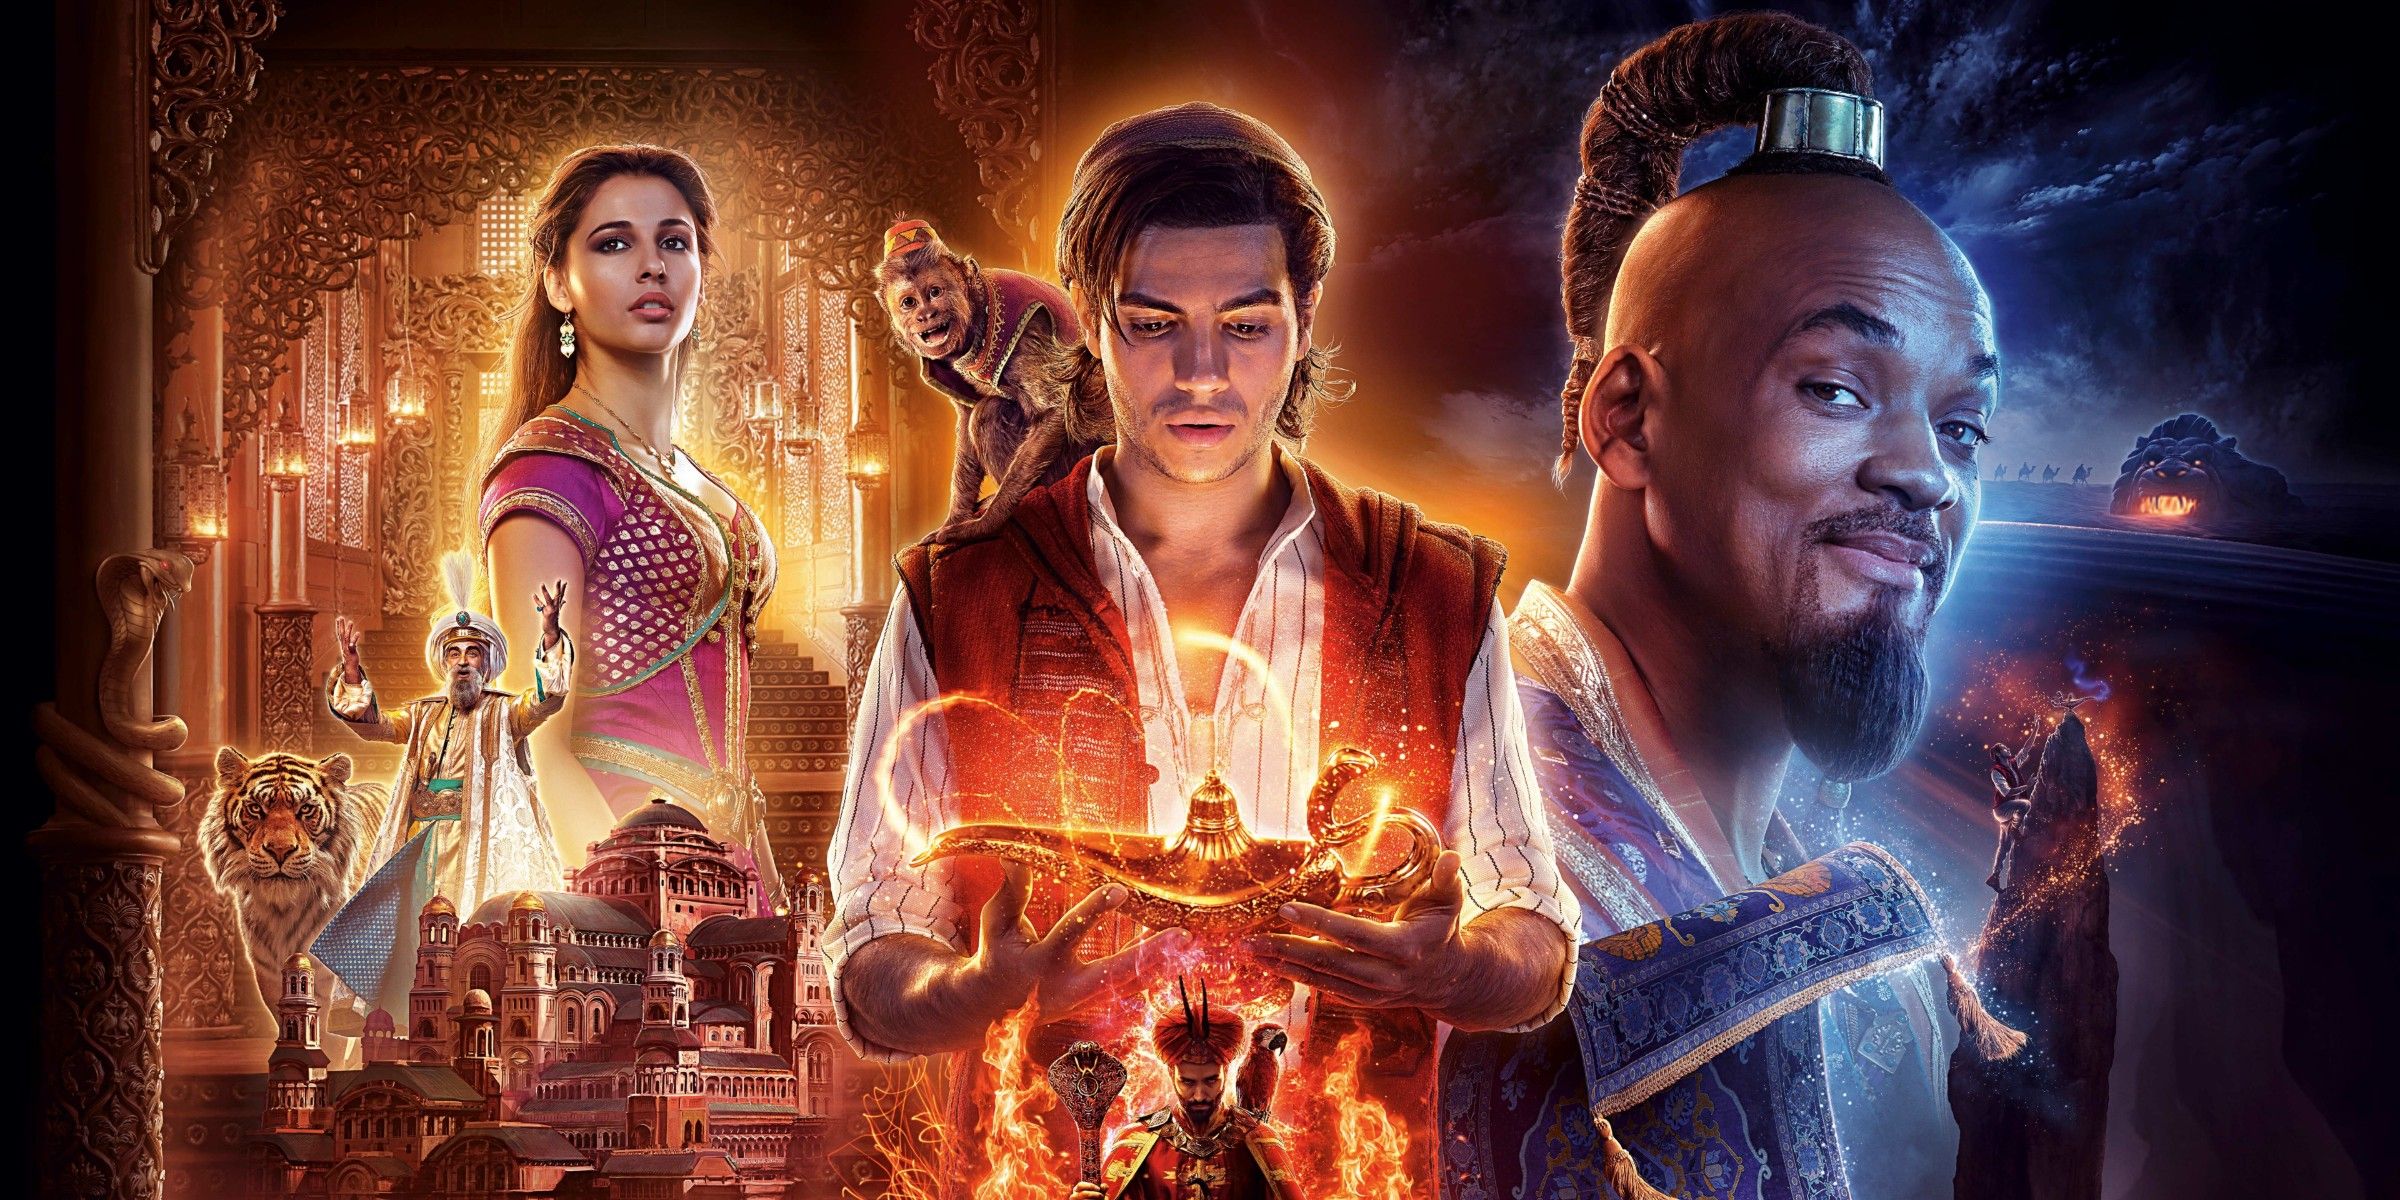 Main characters of the 2019 film Aladdin on a poster.